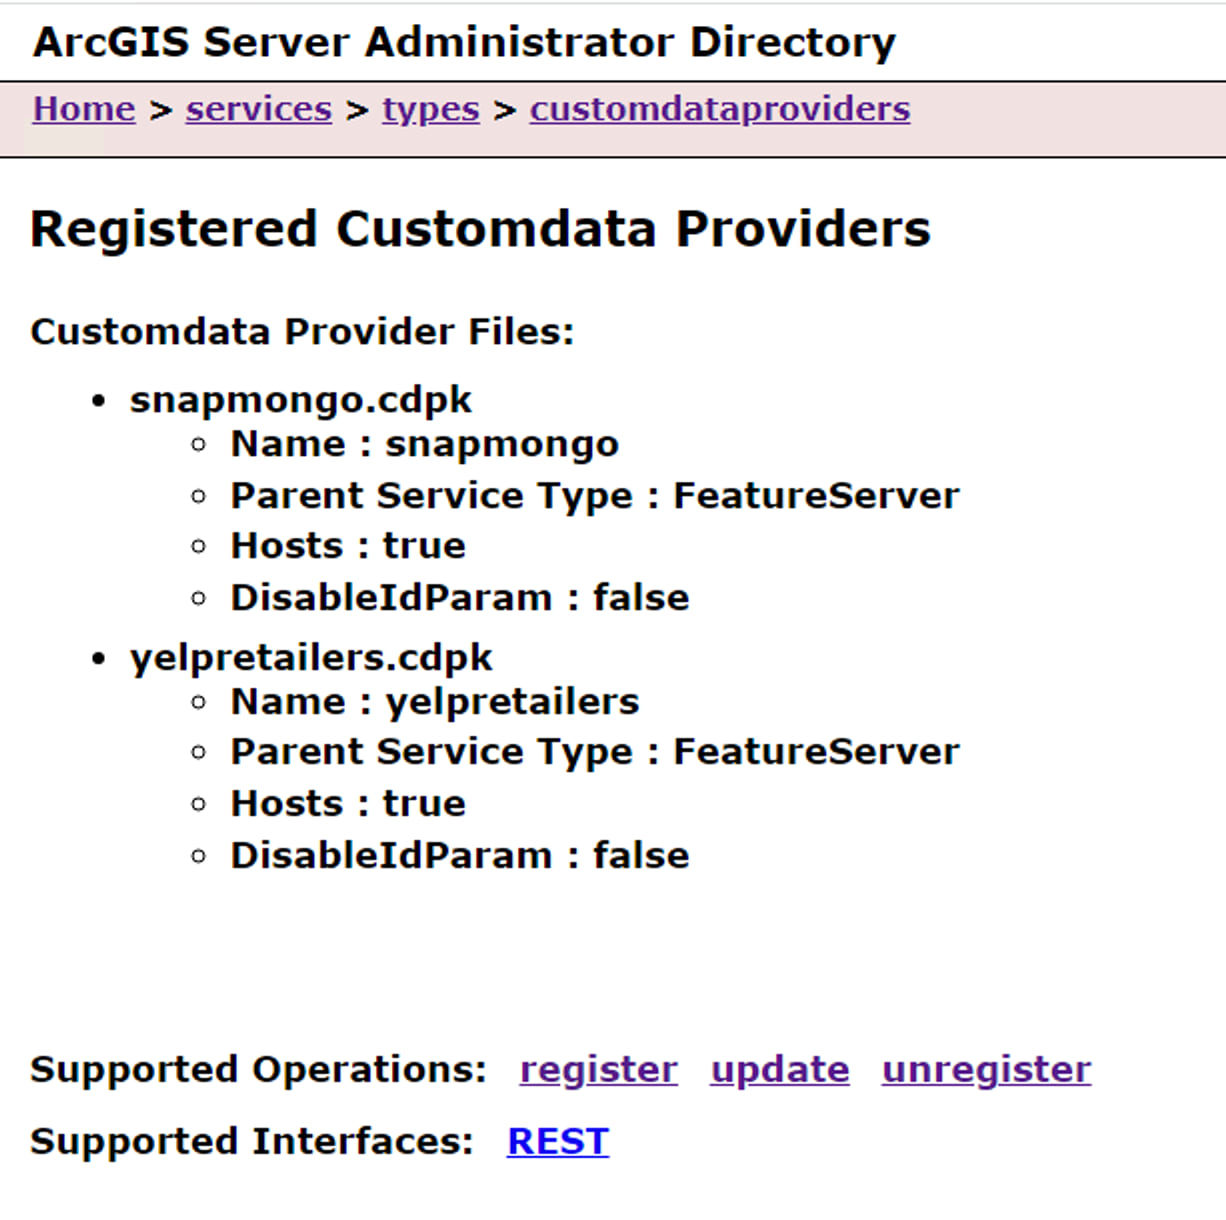 MongoDB and Yelp custom providers registered with ArcGIS Server.